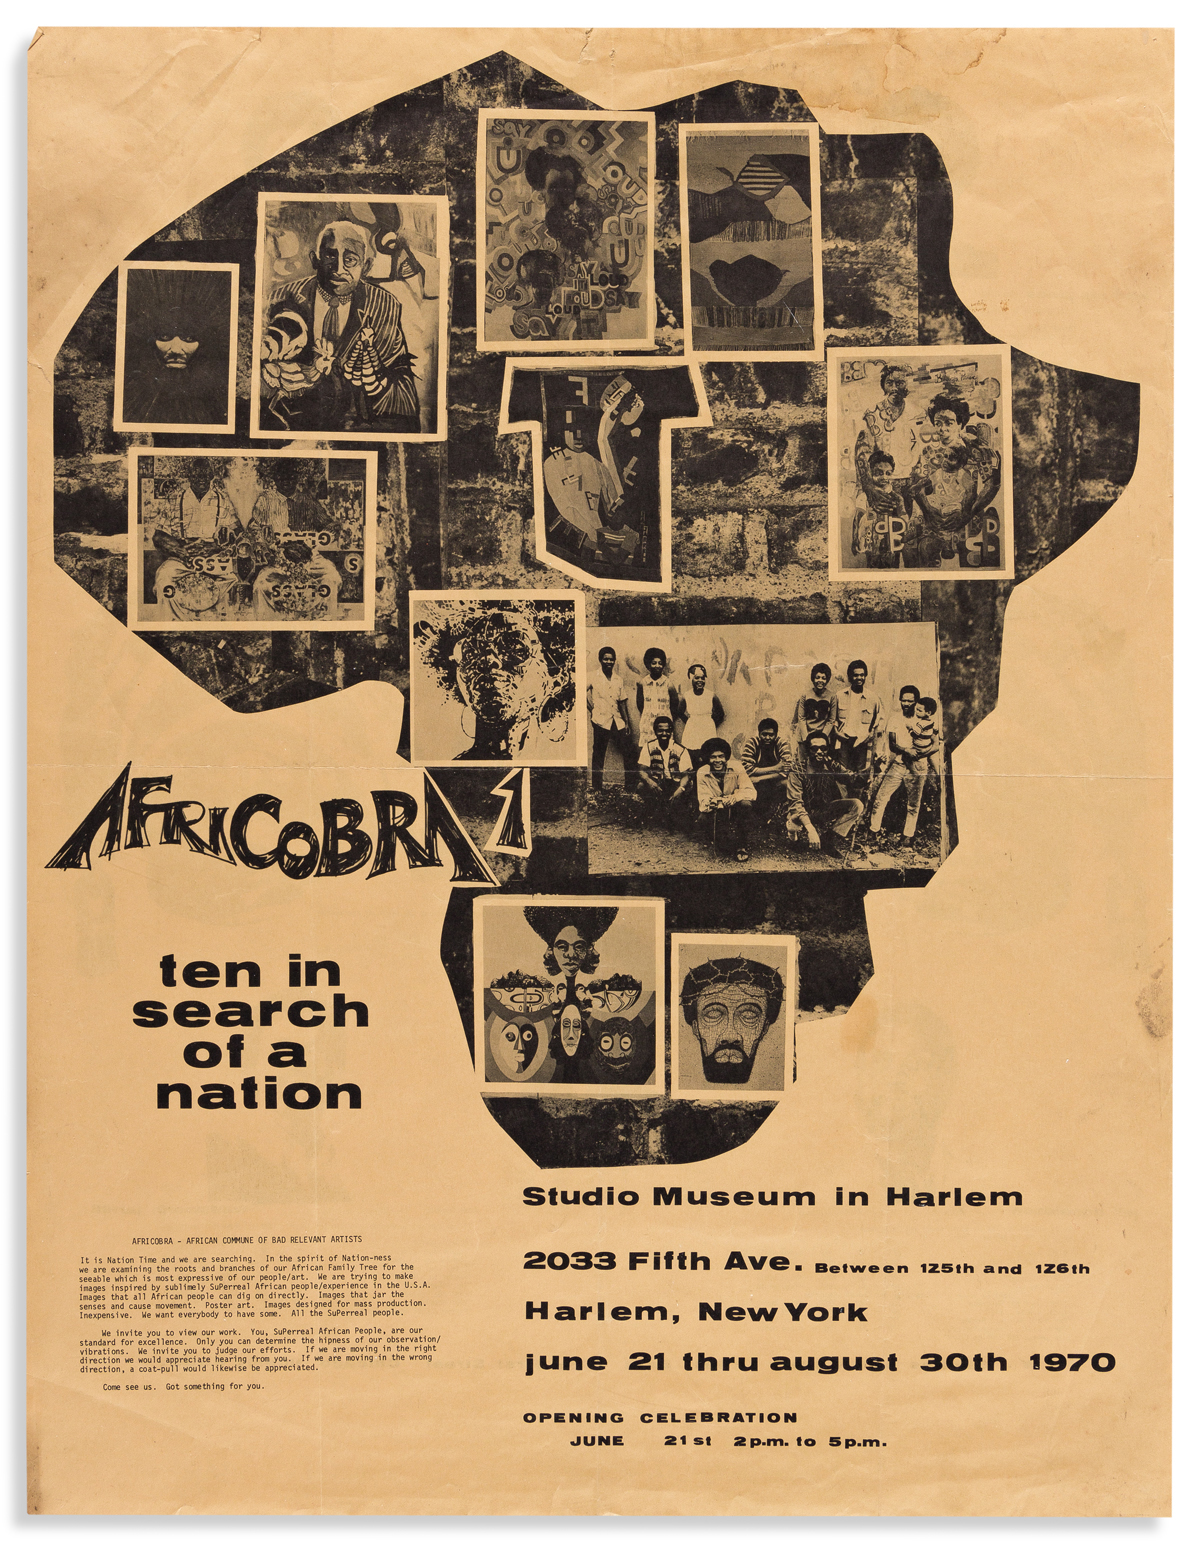 (ART.) AfriCOBRA 1: Ten in Search of a Nation.